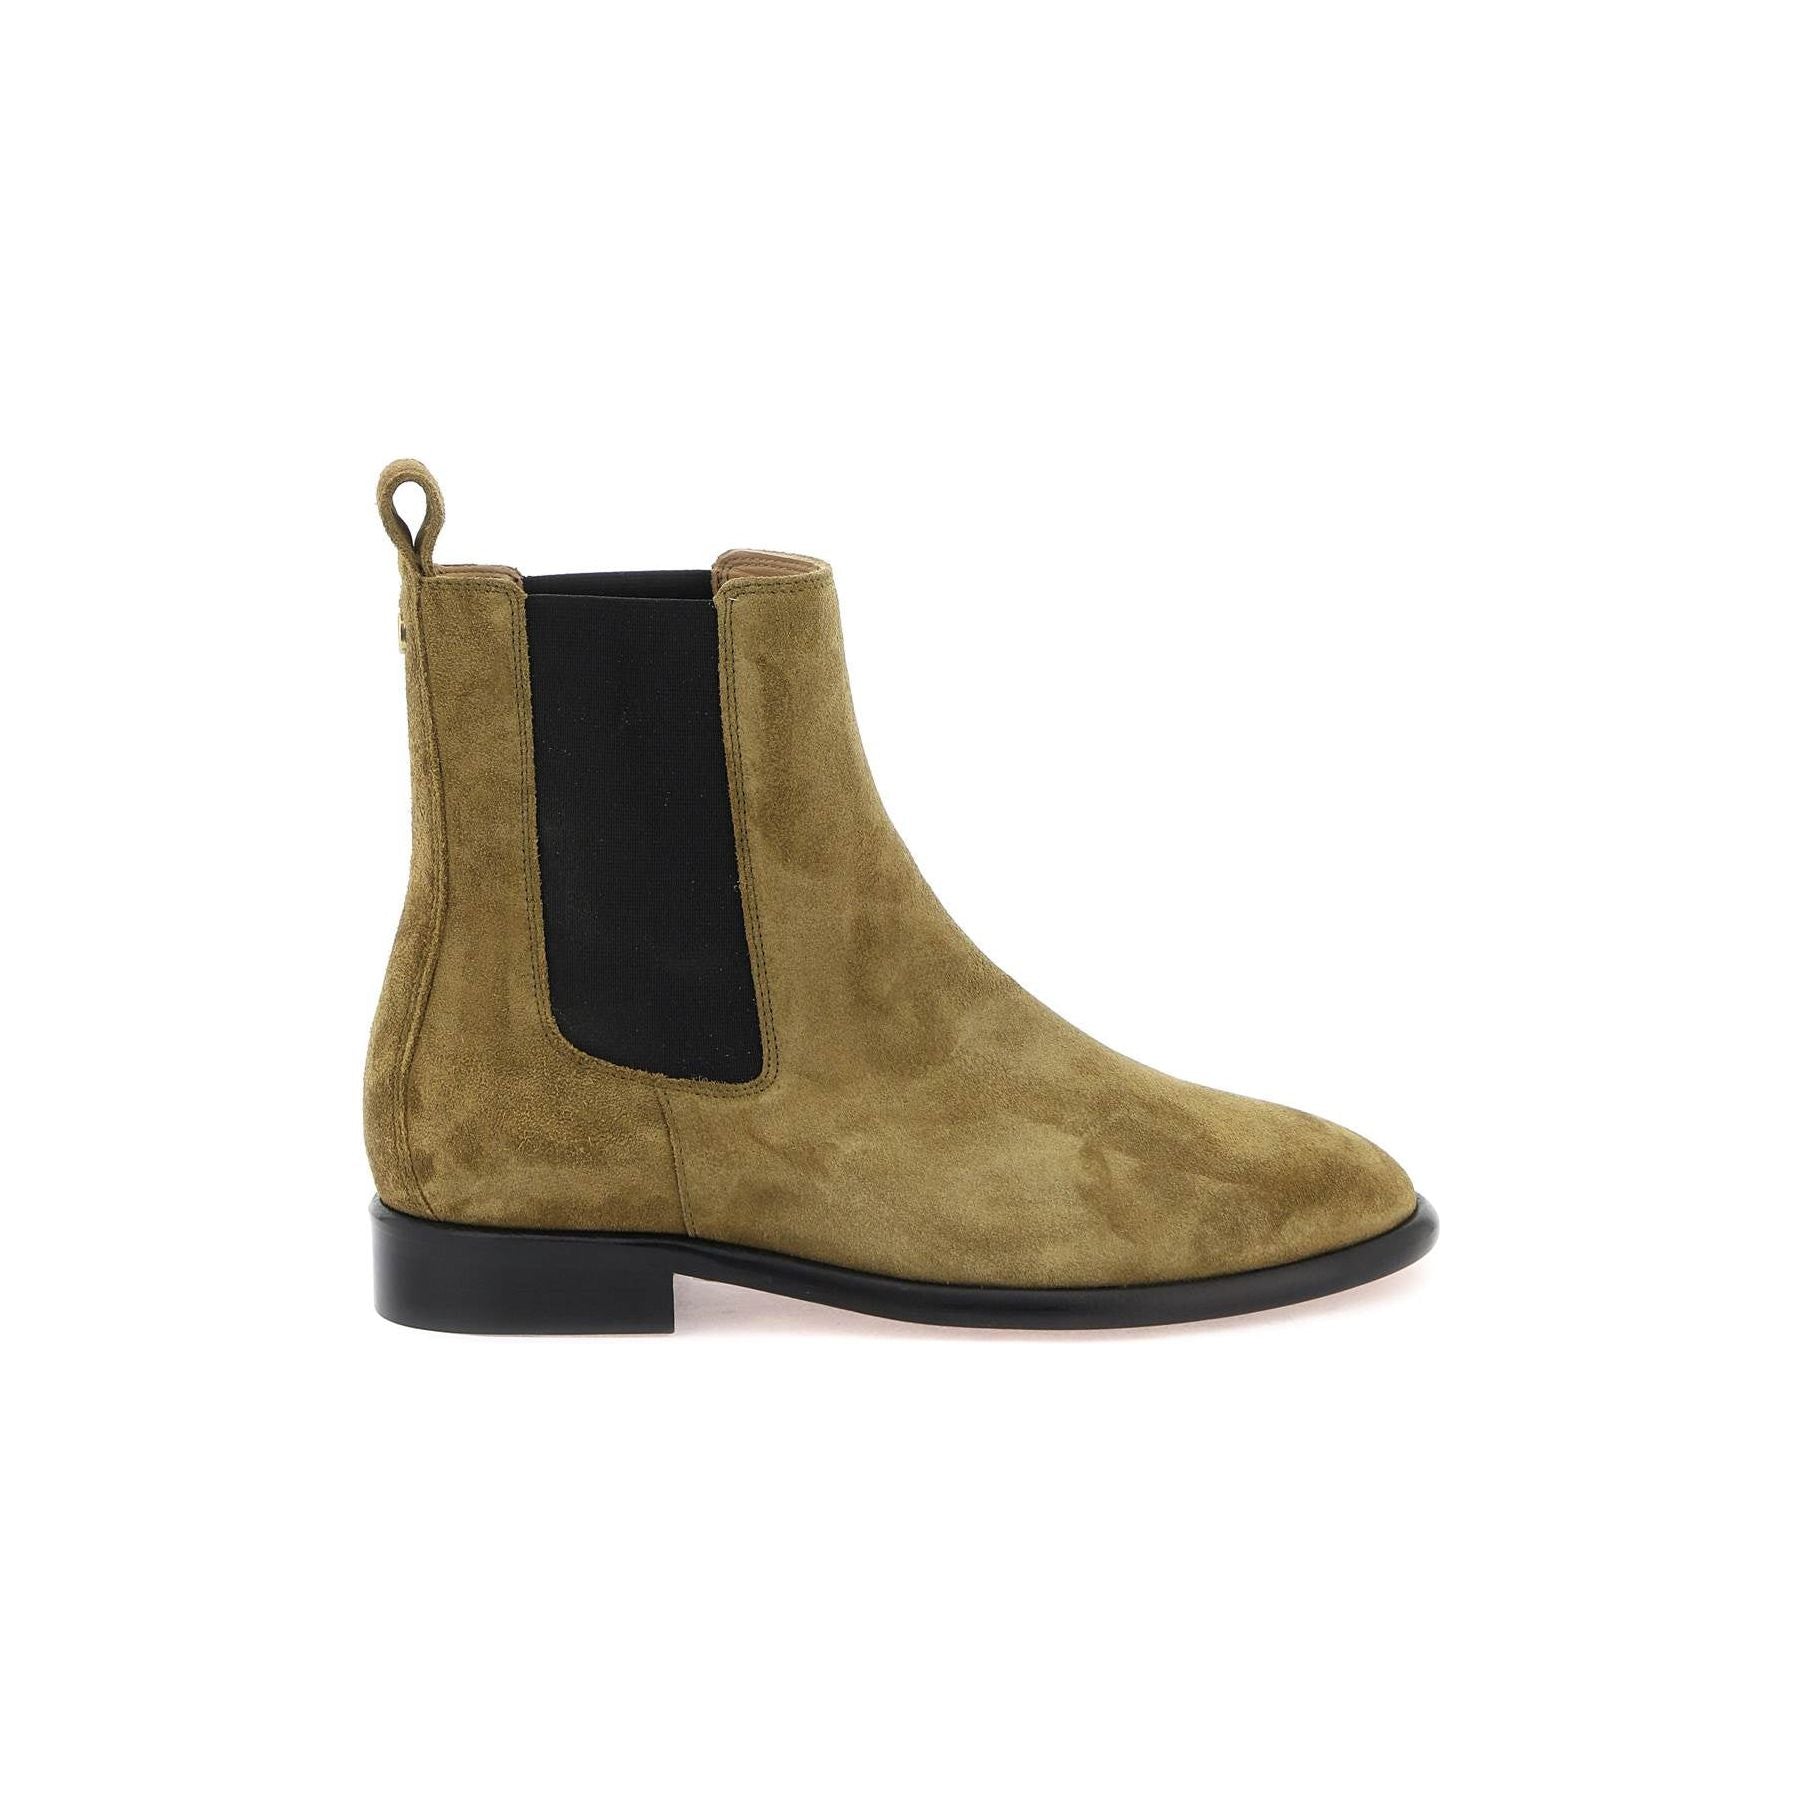 'Galna' Suede Ankle Boots